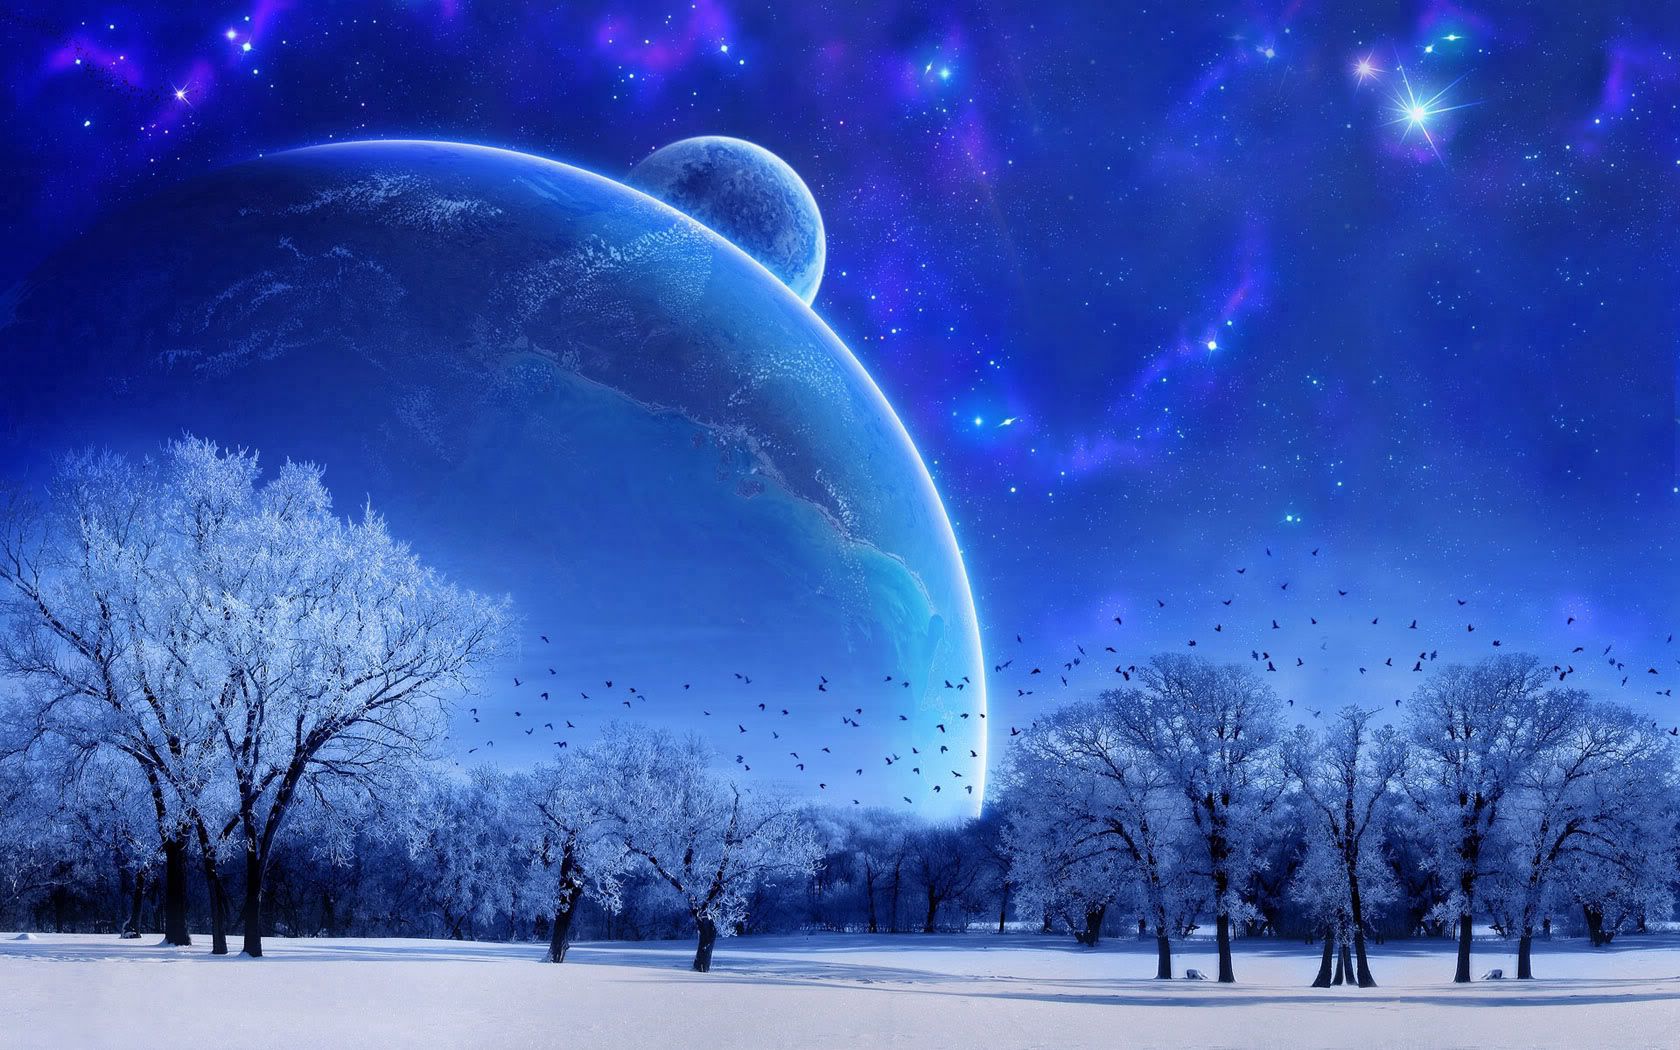 sky, landscape, abstract, nature, full moon, snow, winter, birds, trees, evening images